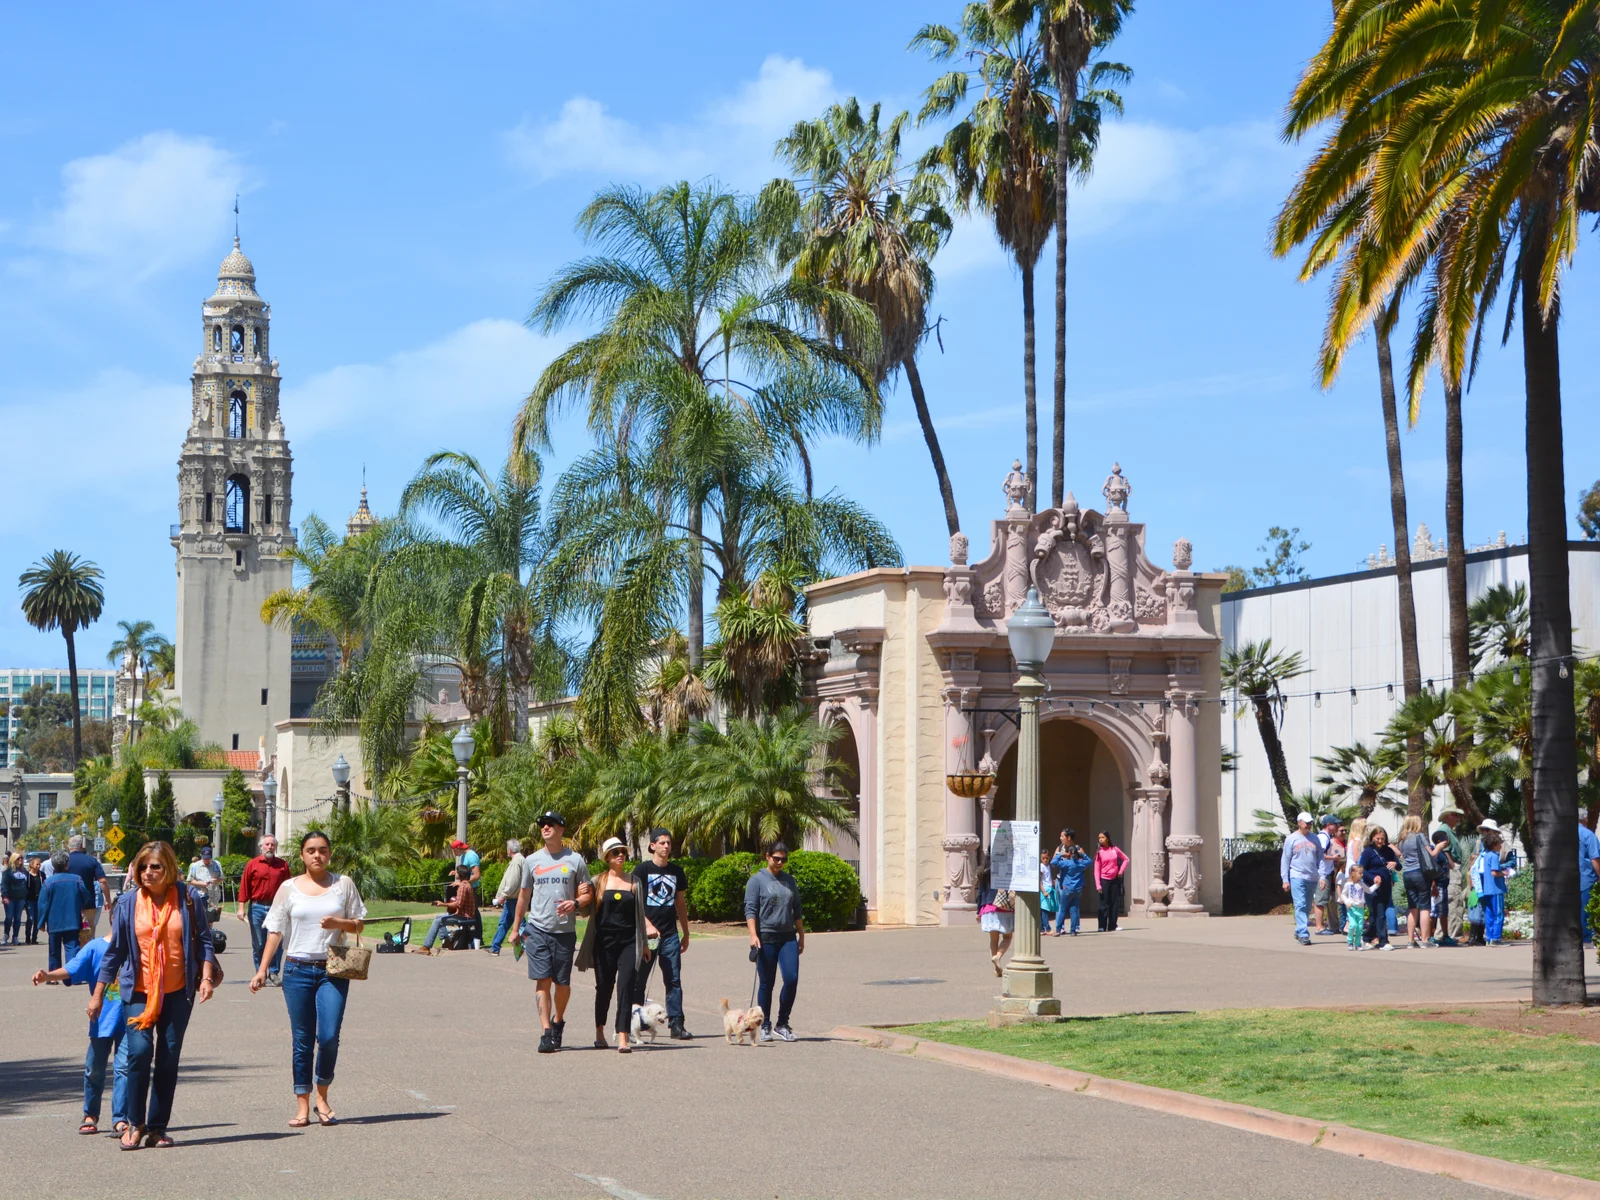 Balboa Park with tourists outside the walls for a post on where to stay in San Diego